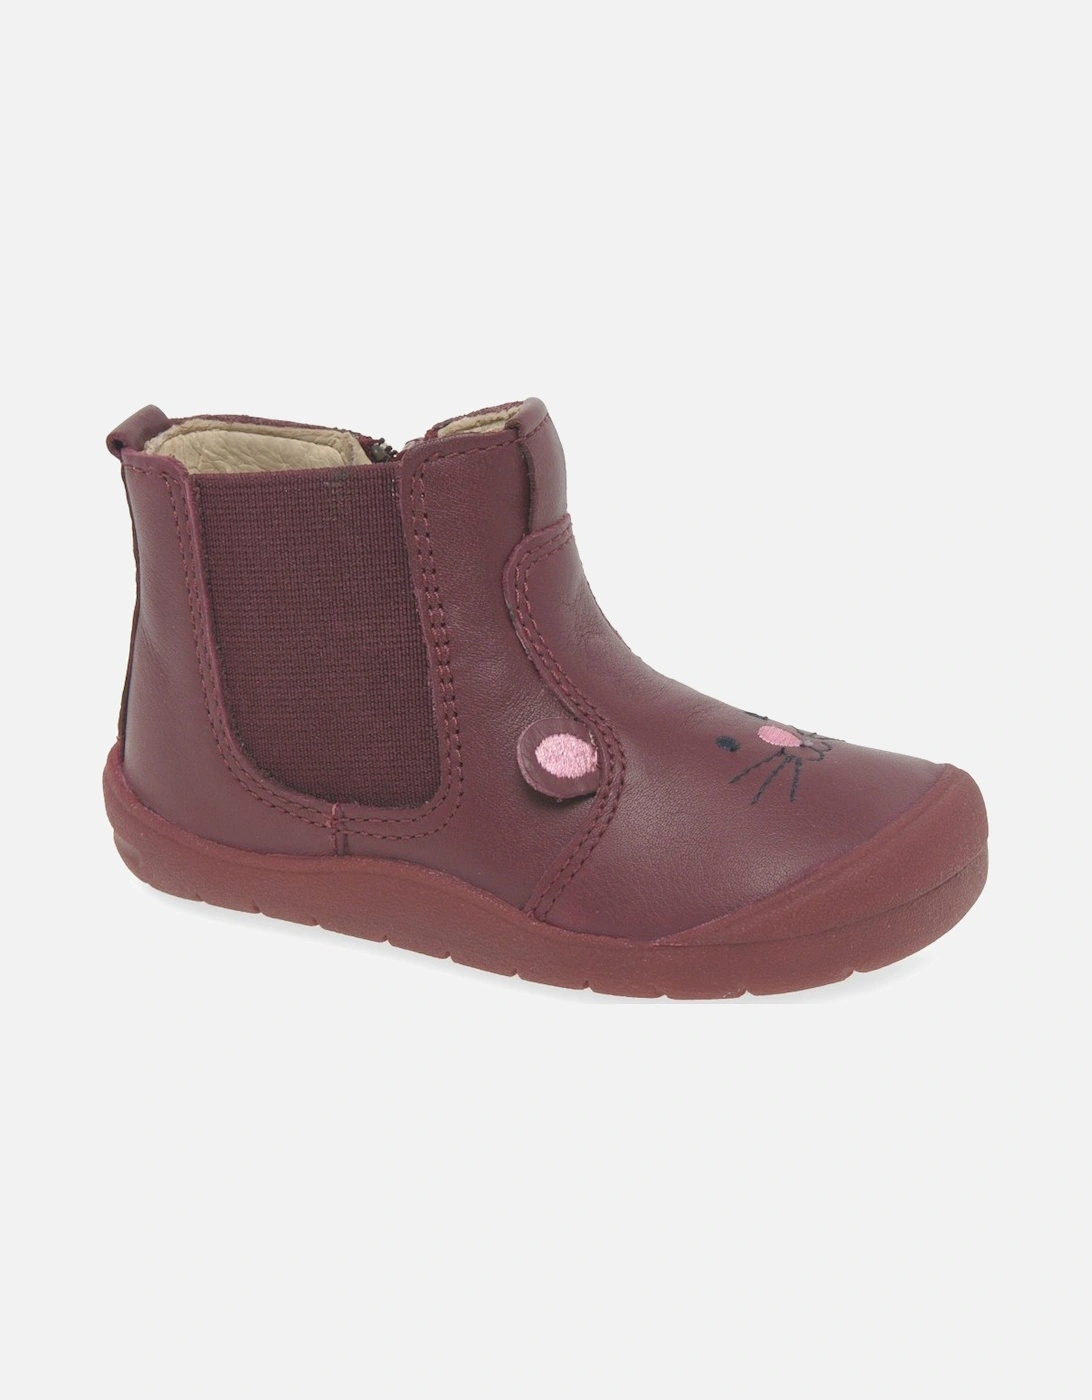 Friend Mouse Girls Infant Boots, 6 of 5